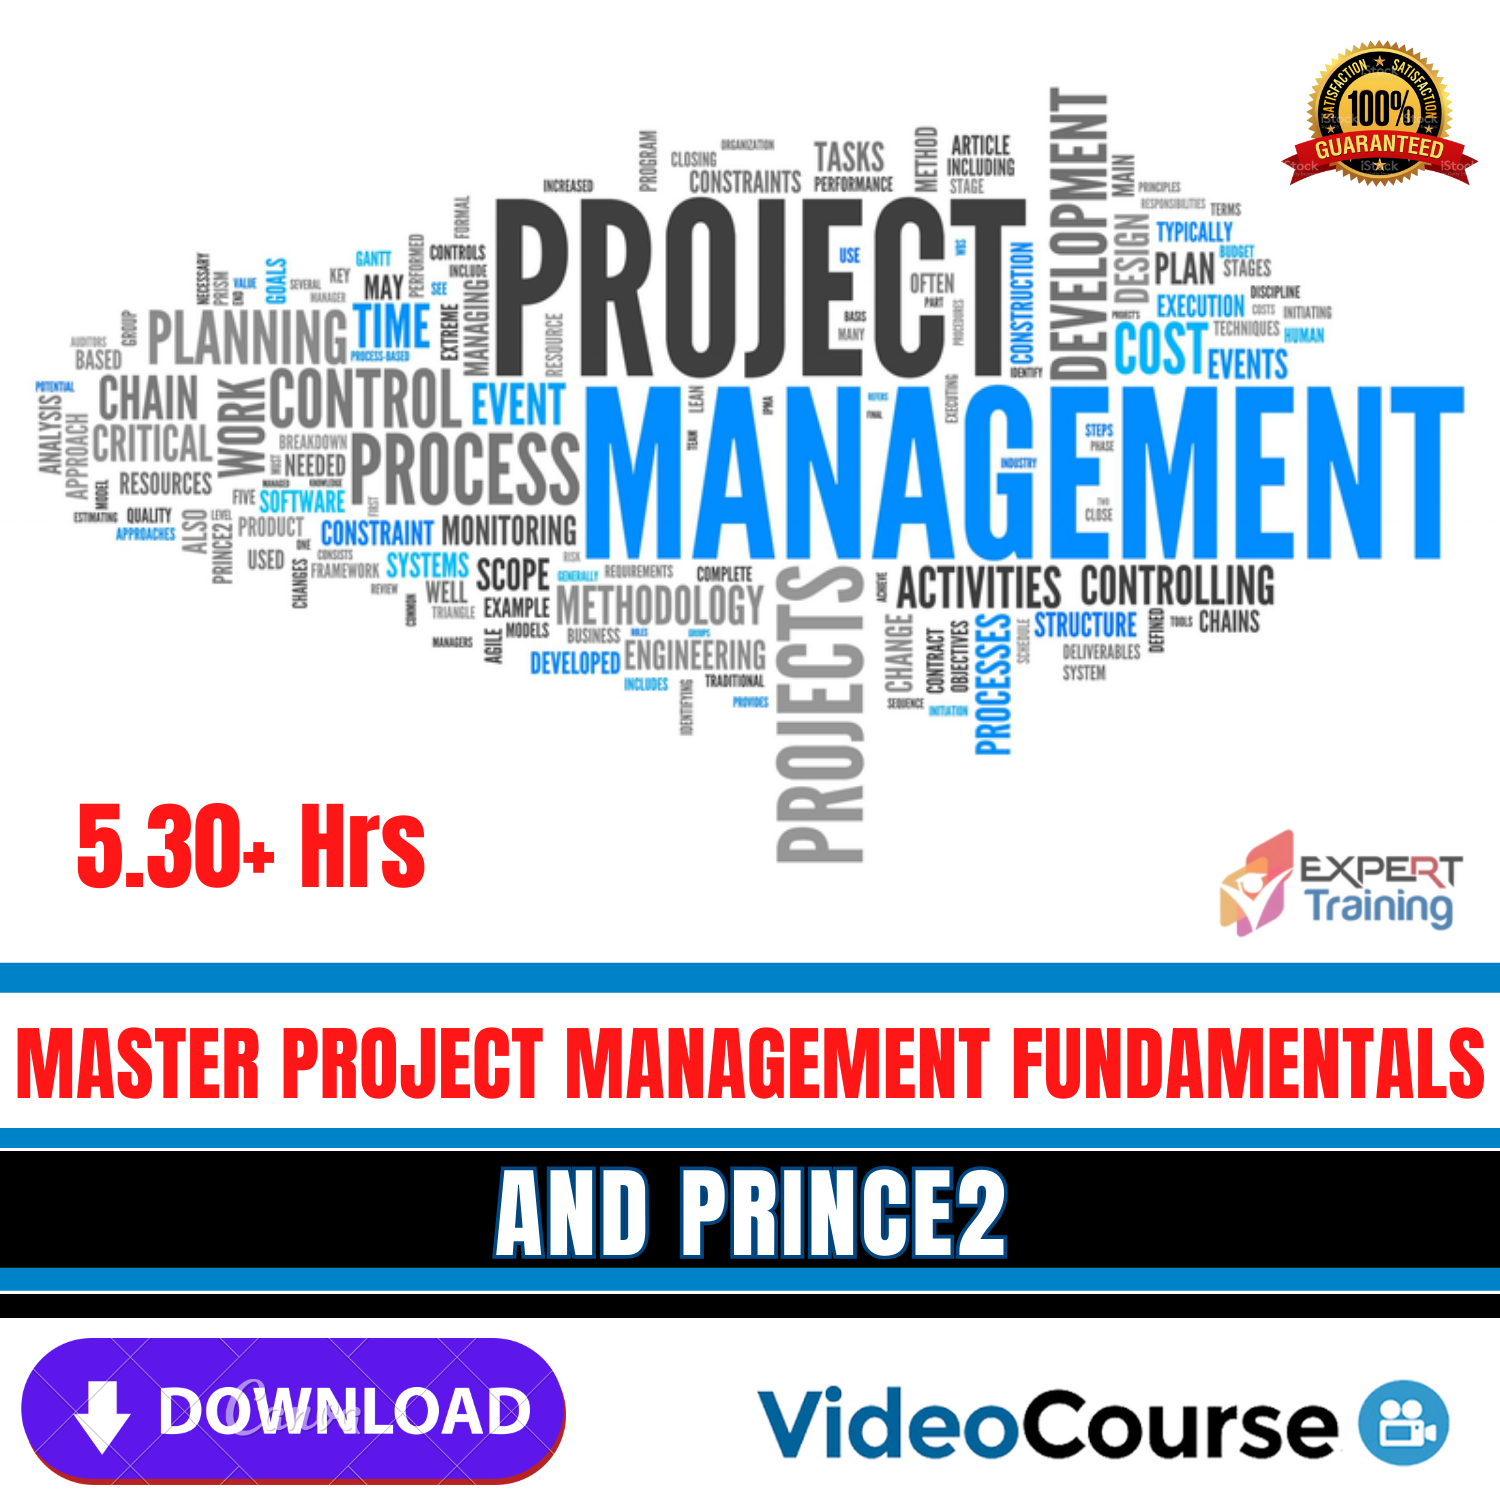 Master Project Management Fundamentals And Prince2